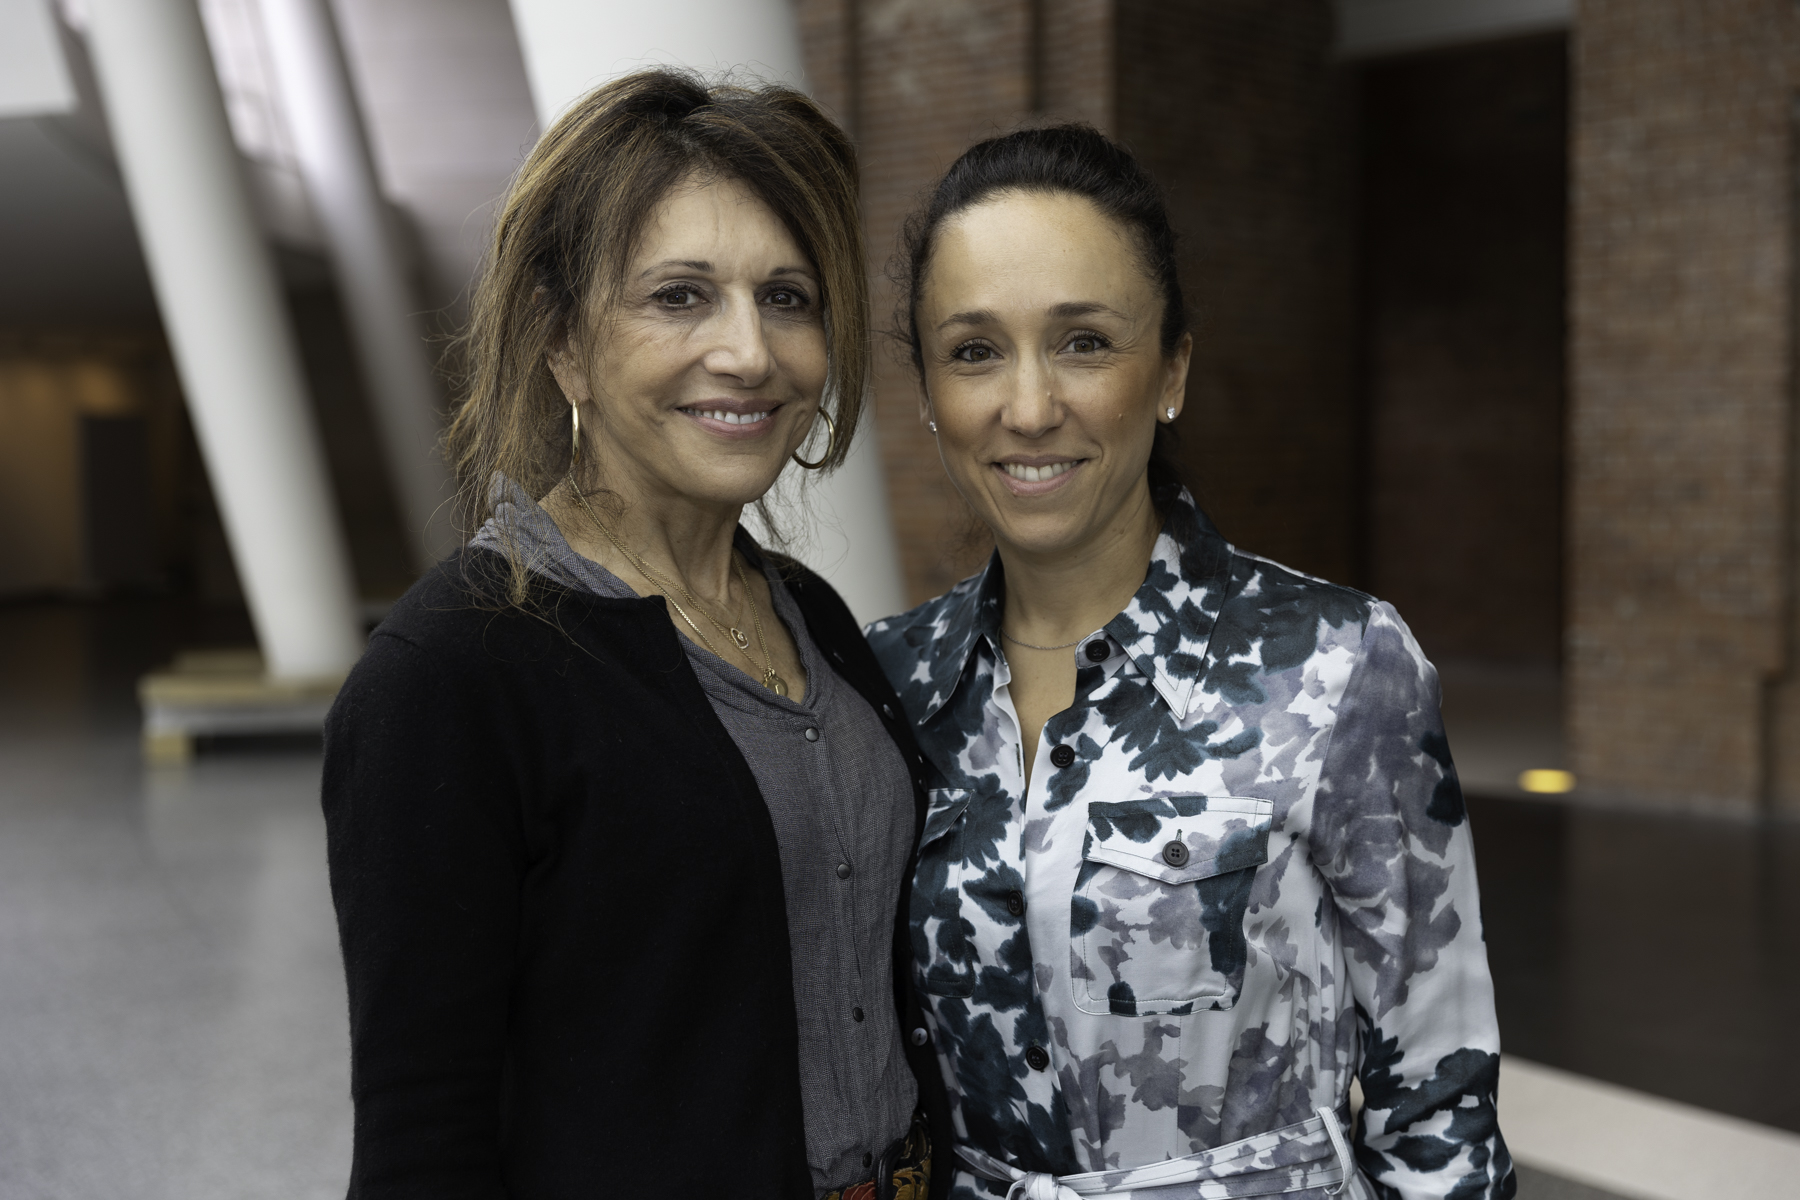 Two women posing for a photograph indoors, smiling at the camera, with one wearing a gray jacket and the other in a camouflaged pattern shirt.